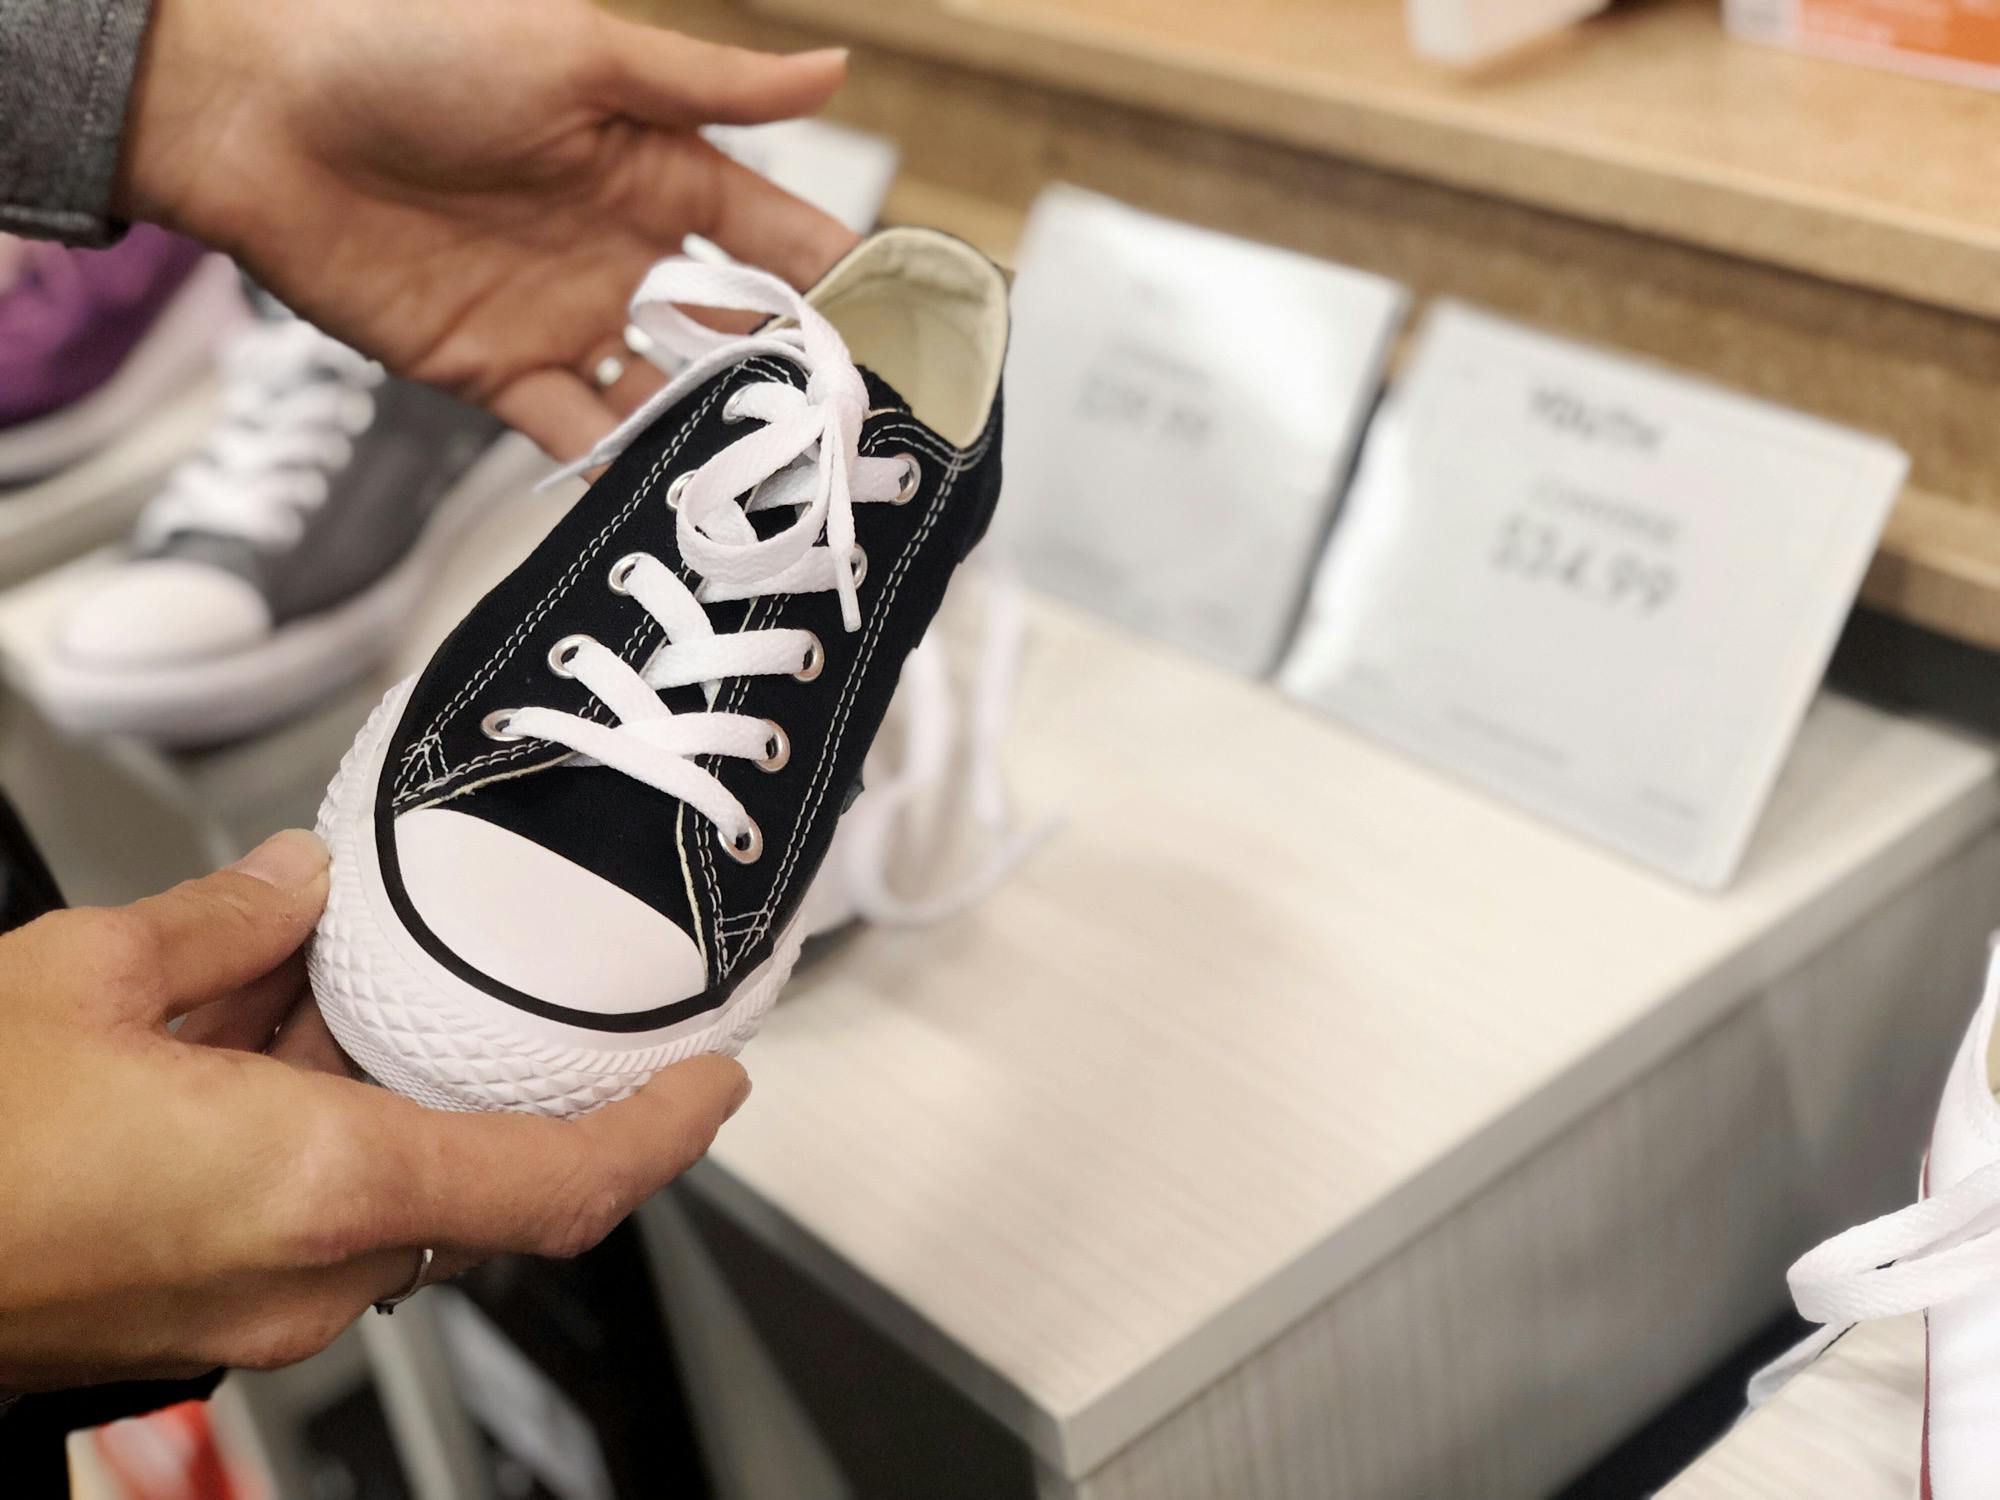 15 Converse Sales Tips and Tricks To Get All The Deals - The Krazy Lady